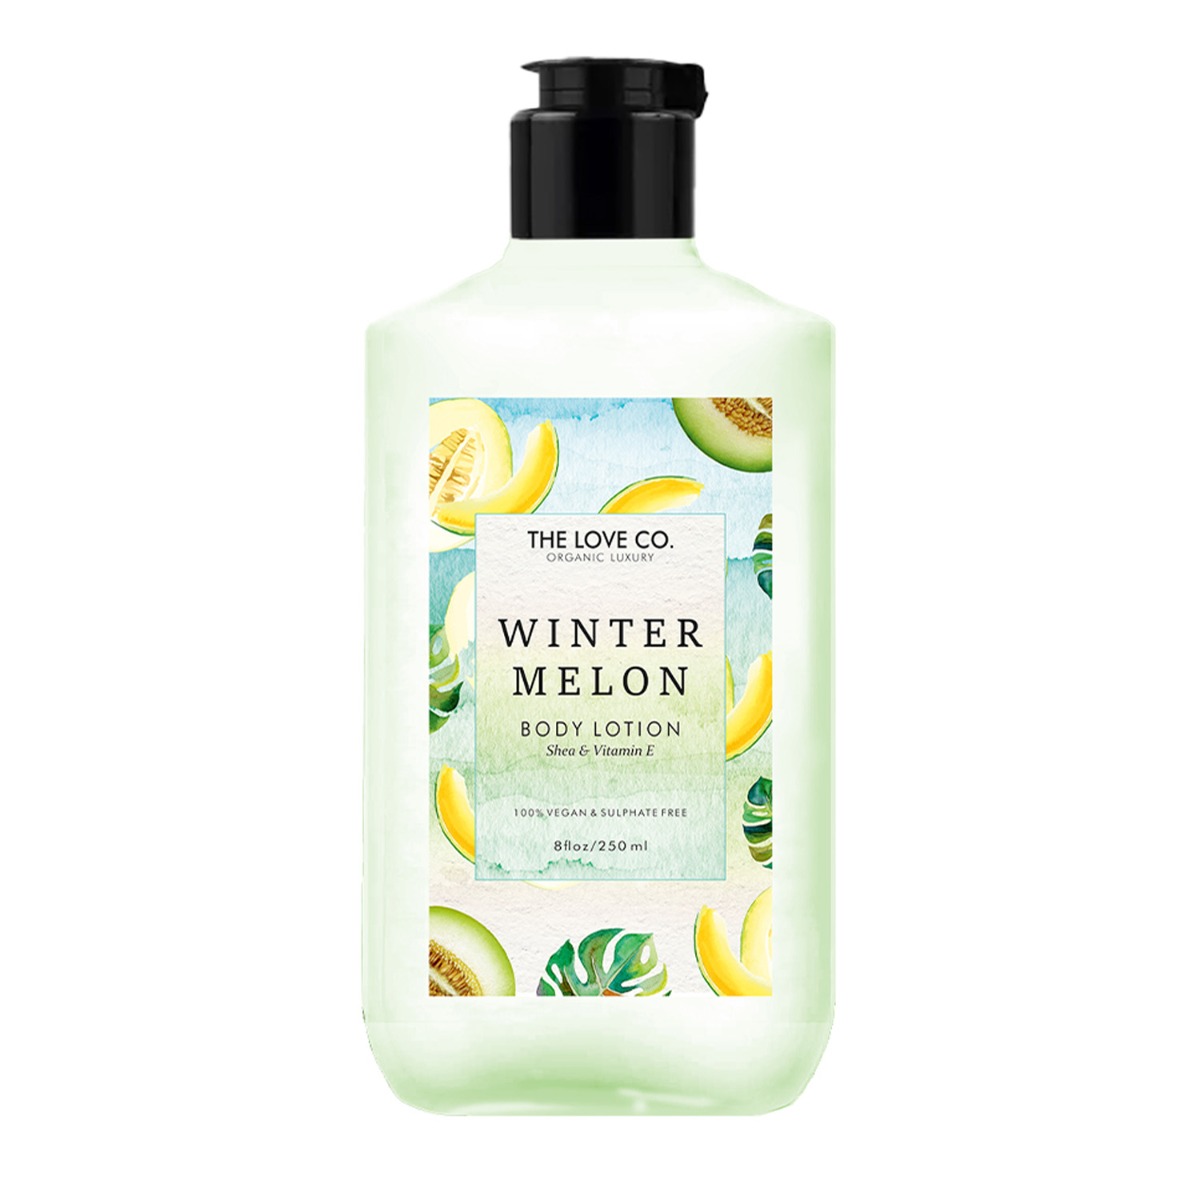 The Love Co. Winter Melon Body Lotion With Shea Butter & Vitamin E Extracts For Dry Skin, 250ml